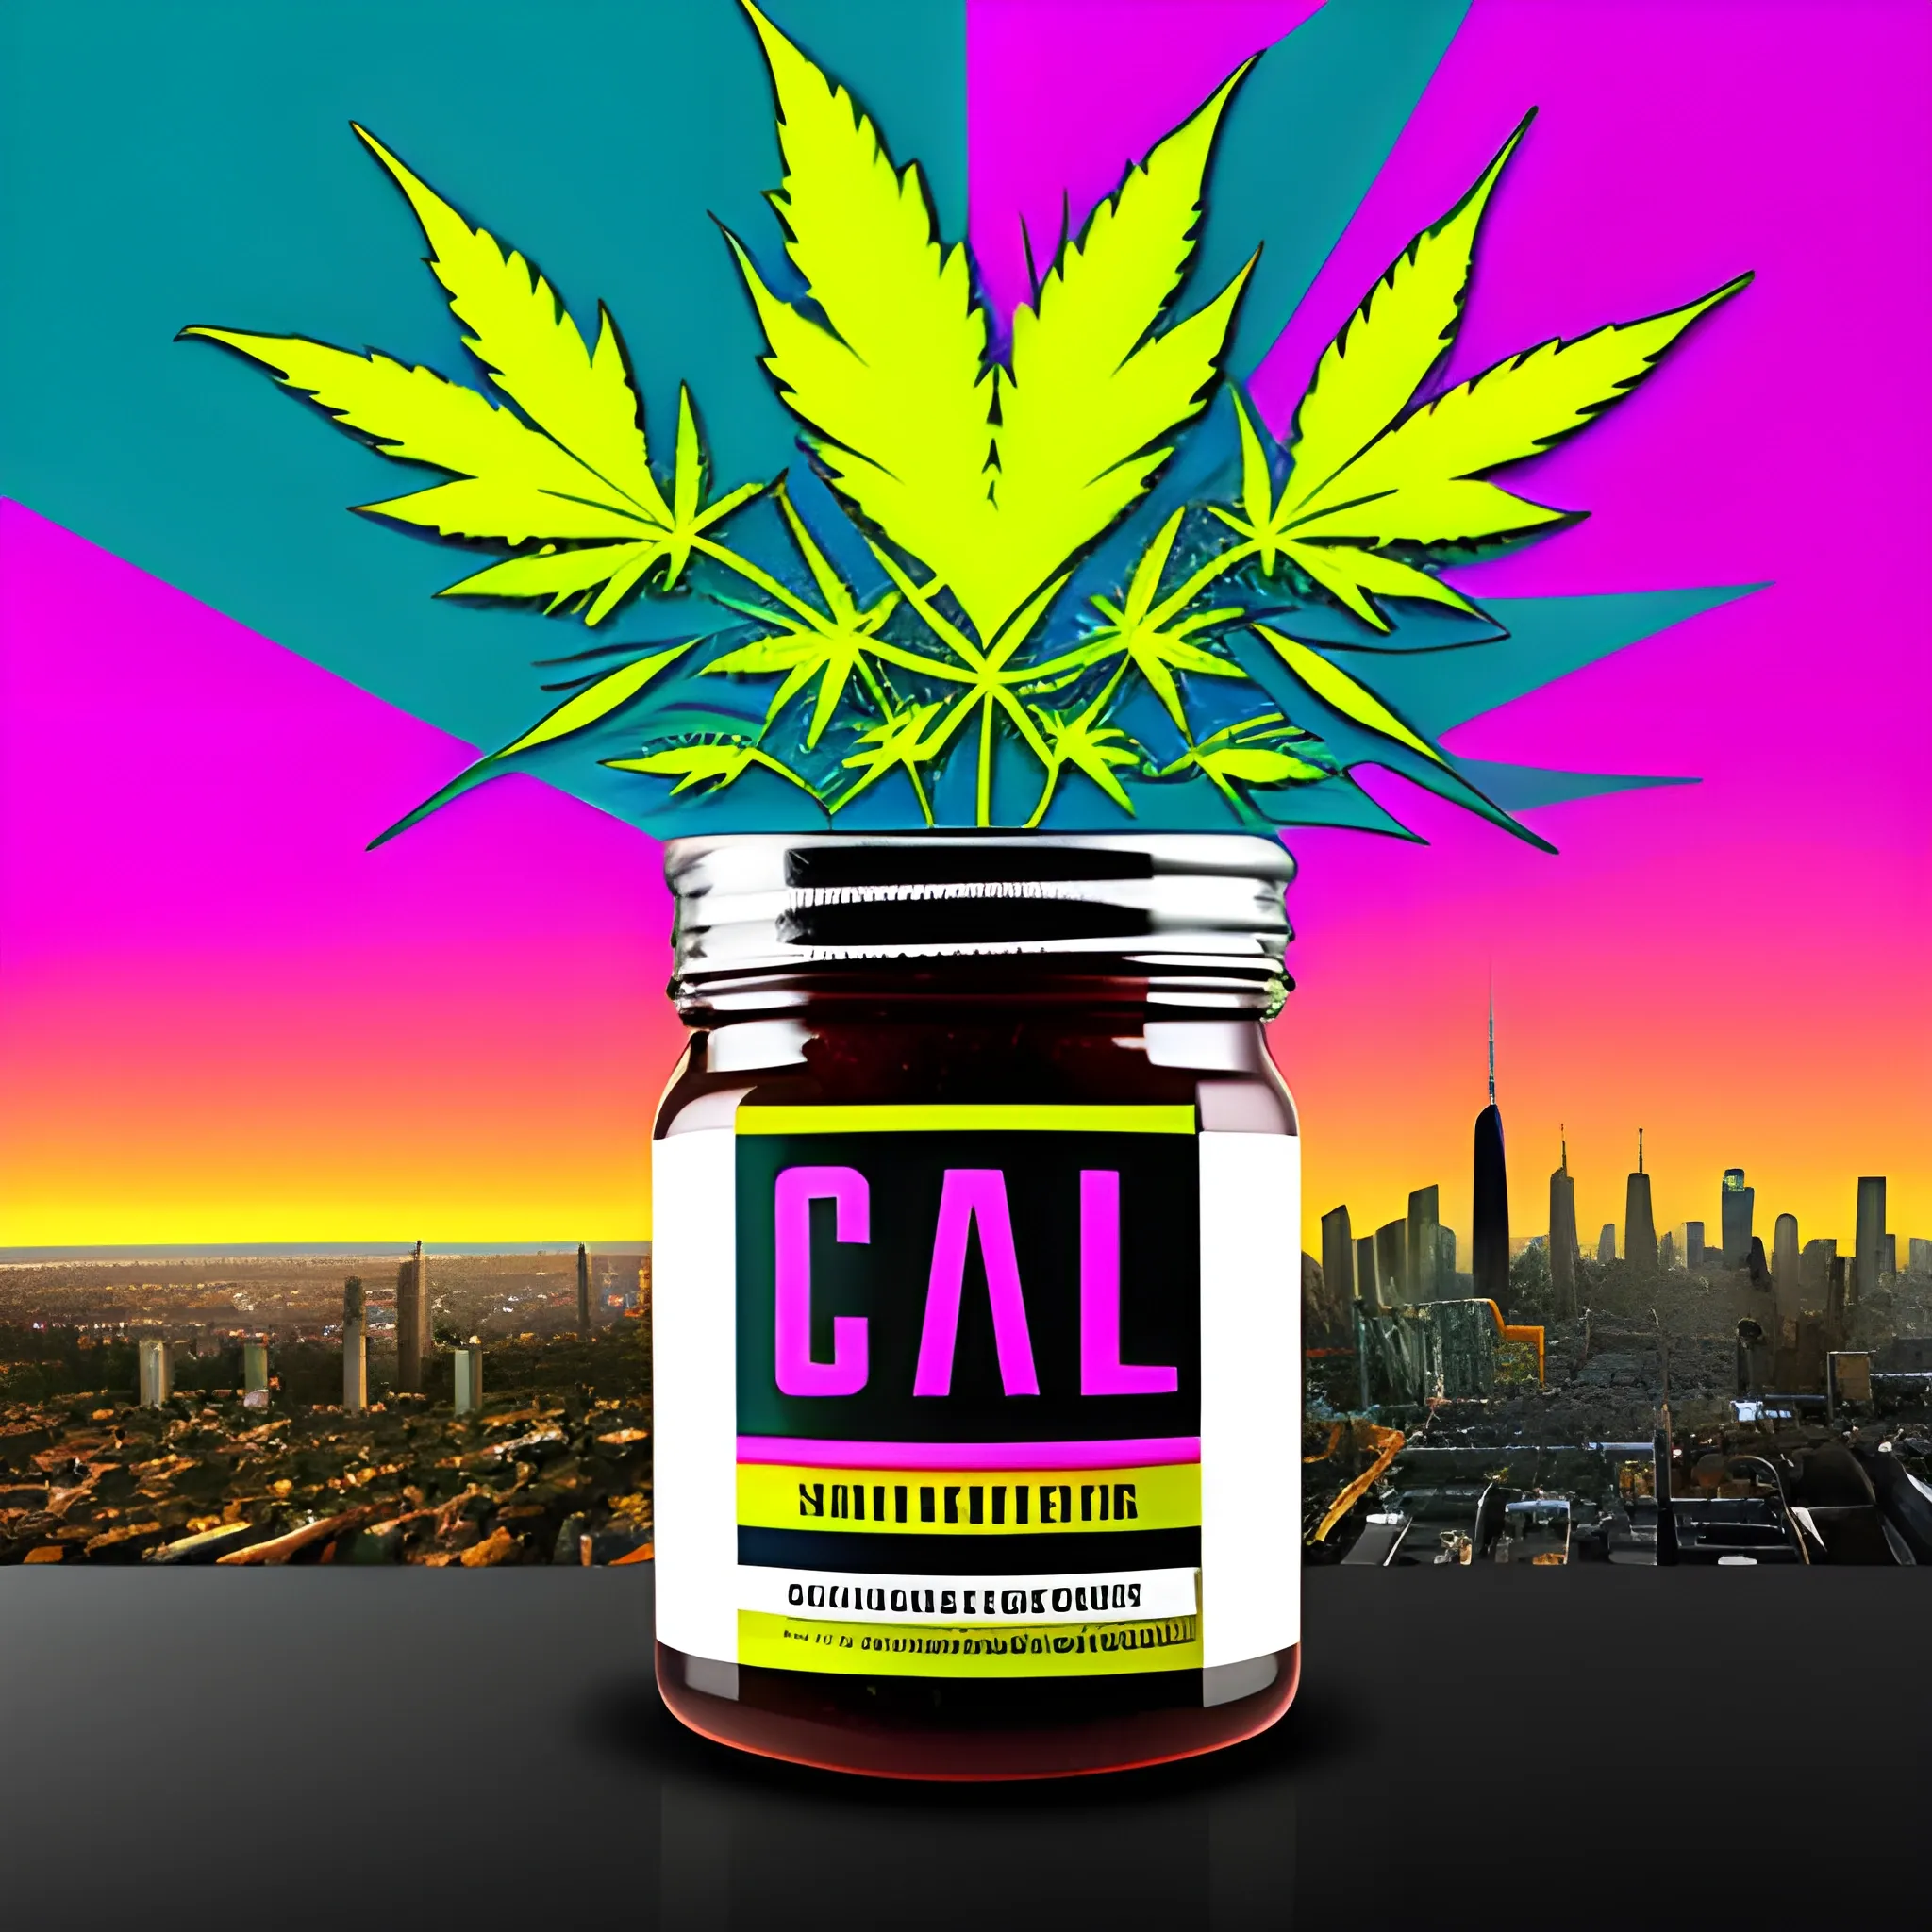 Create a vibrant and edgy label design for 'Cali Berry' Cannabis Jar, targeting a youthful, urban audience. Incorporate elements that reflect a dynamic cityscape, graffiti-inspired artwork, and a sense of nightlife energy. Utilize bold, modern fonts and vivid color schemes to evoke a sense of excitement and style. Emphasize the rebellious and adventurous spirit of the brand, while maintaining a clean and eye-catching layout. Remember to incorporate the 'GEMZ' logo prominently. Get creative with the composition to make it stand out on the shelf and appeal to the young, trendsetting demographic